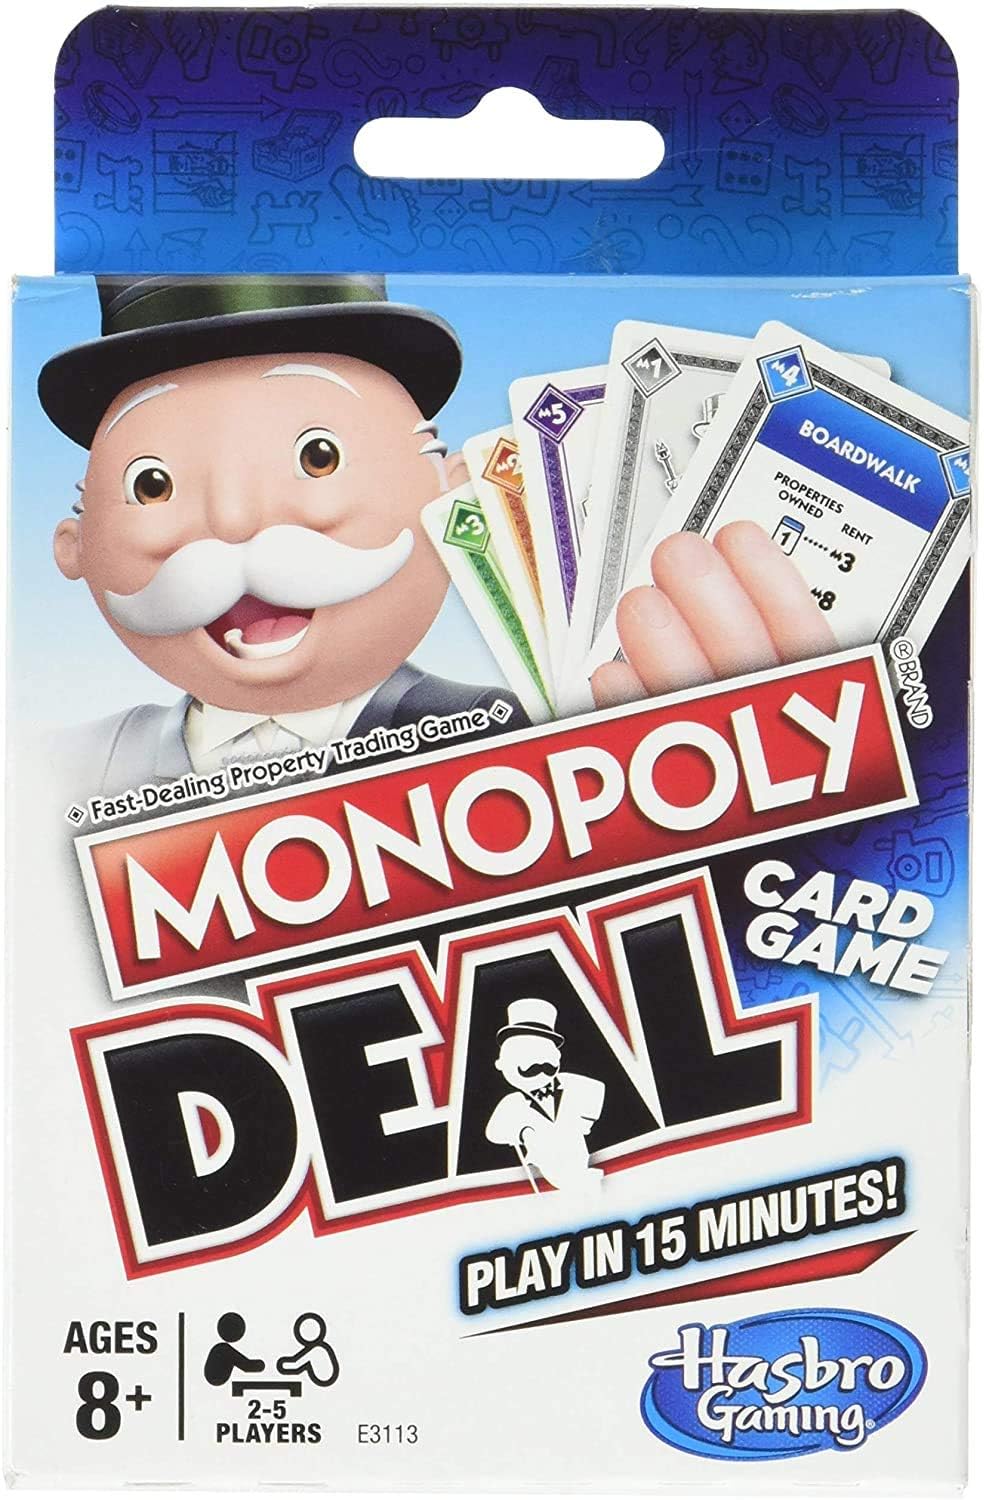 Monopoly Deal - Bards & Cards